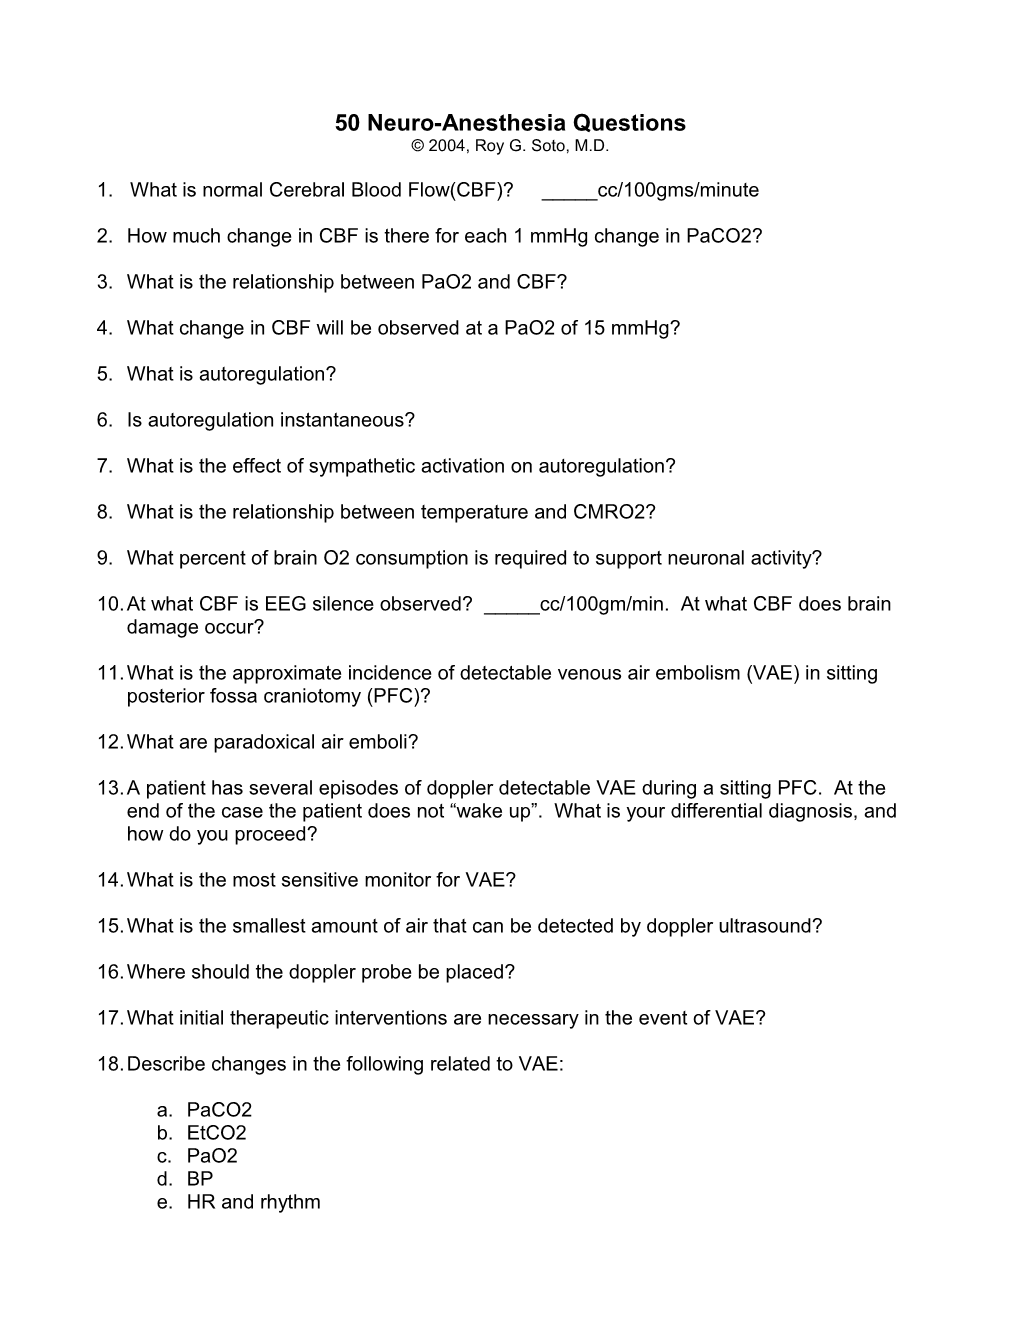 Neuro-Anesthesia Questions